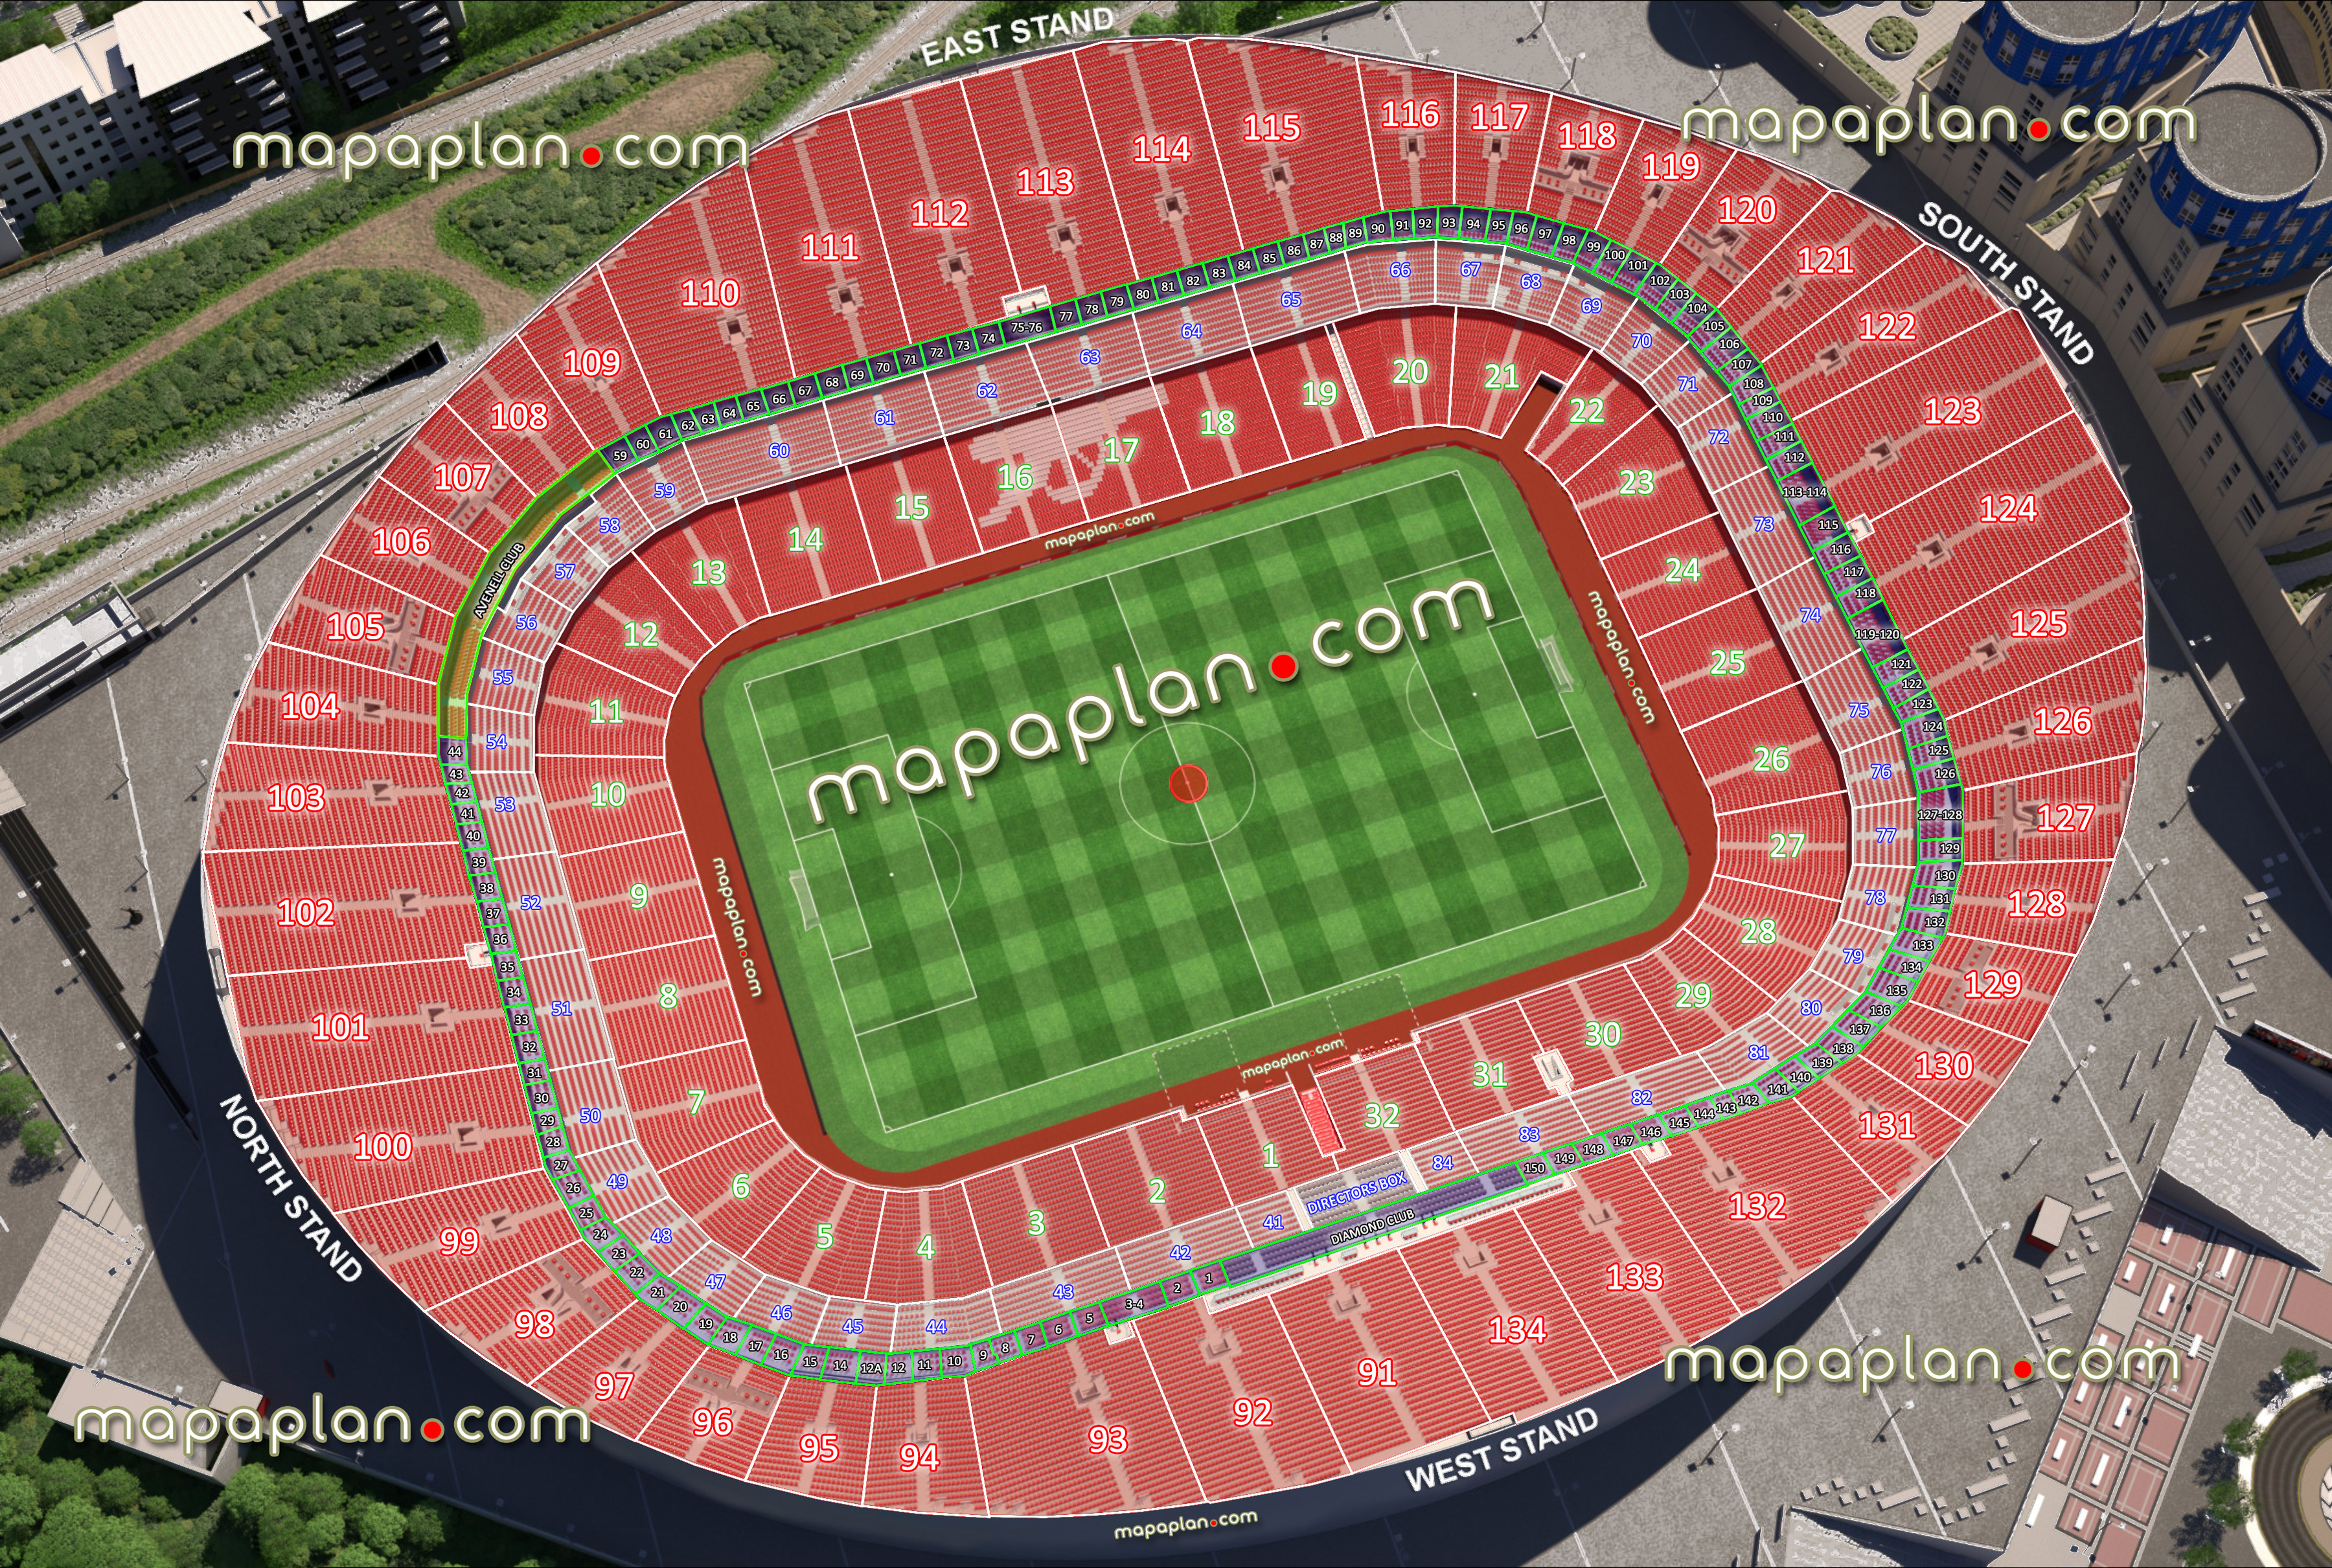 London Arsenal Emirates Stadium virtual seating chart football match seating capacity 360 aerial inside view arrangement plan interactive virtual 3d seats rows sections detailed stadium image layout executive boxes numbers